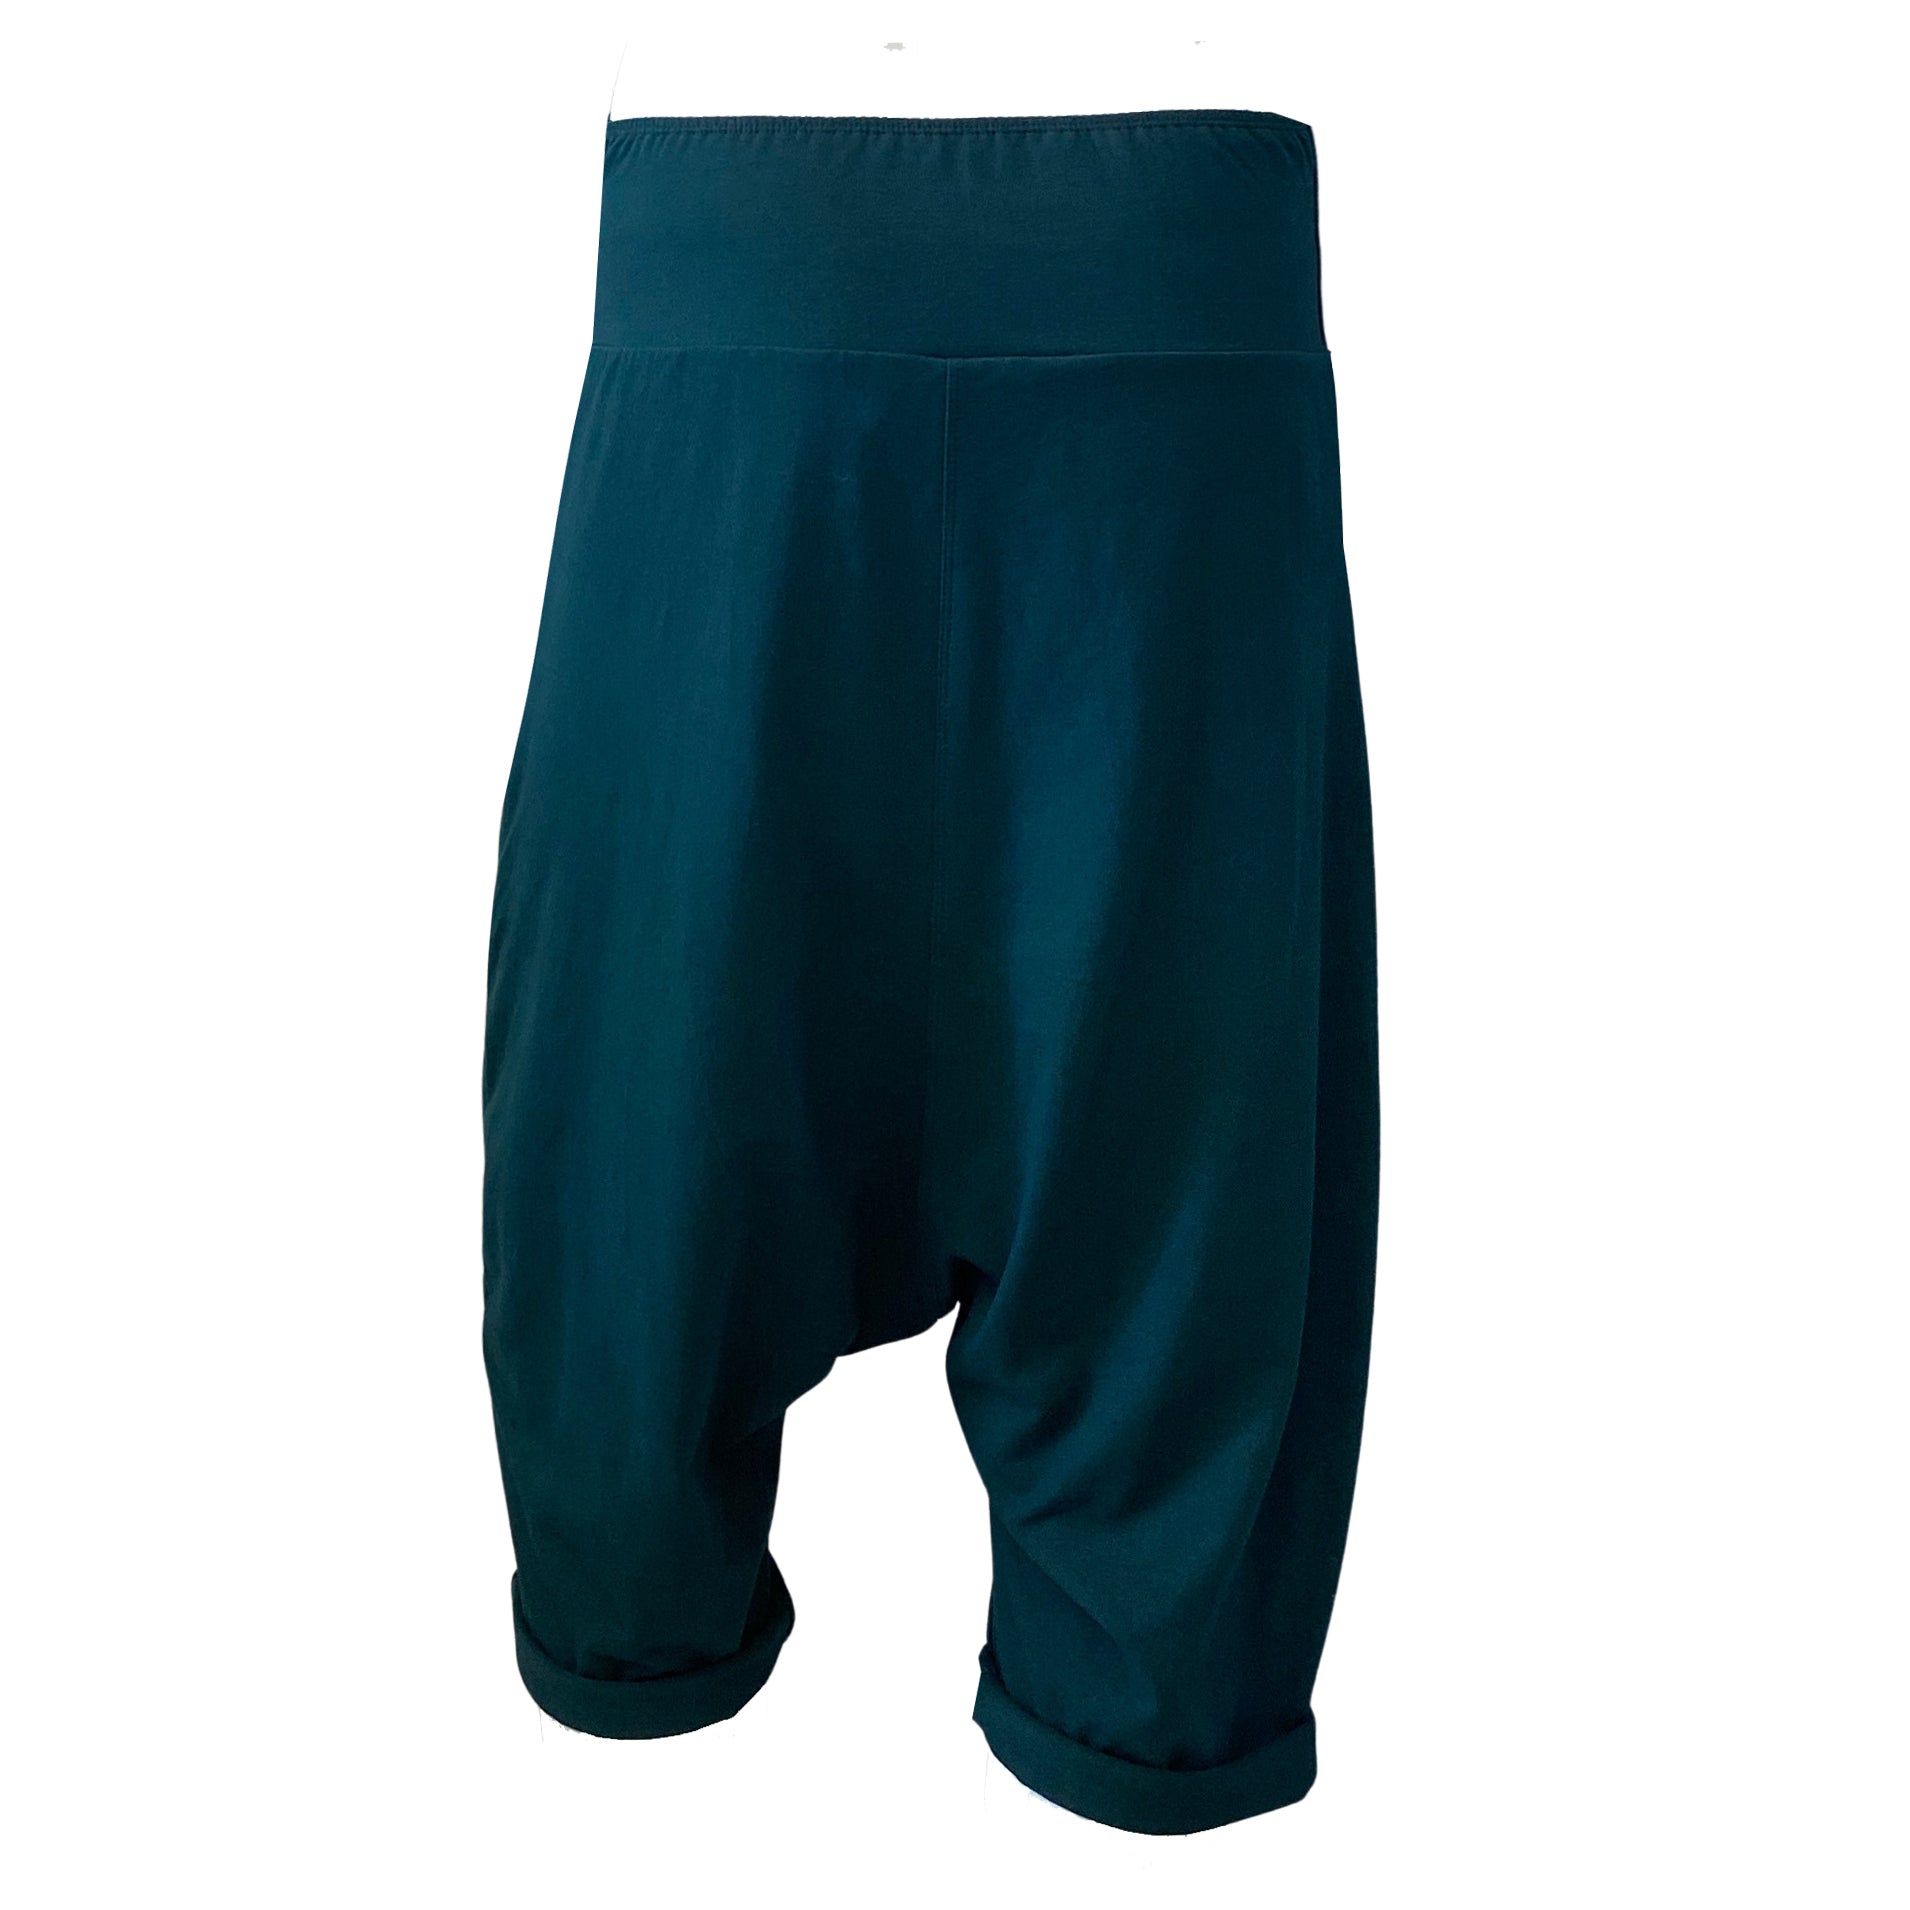 GREEN Low Crotch Shorts OG Cotton